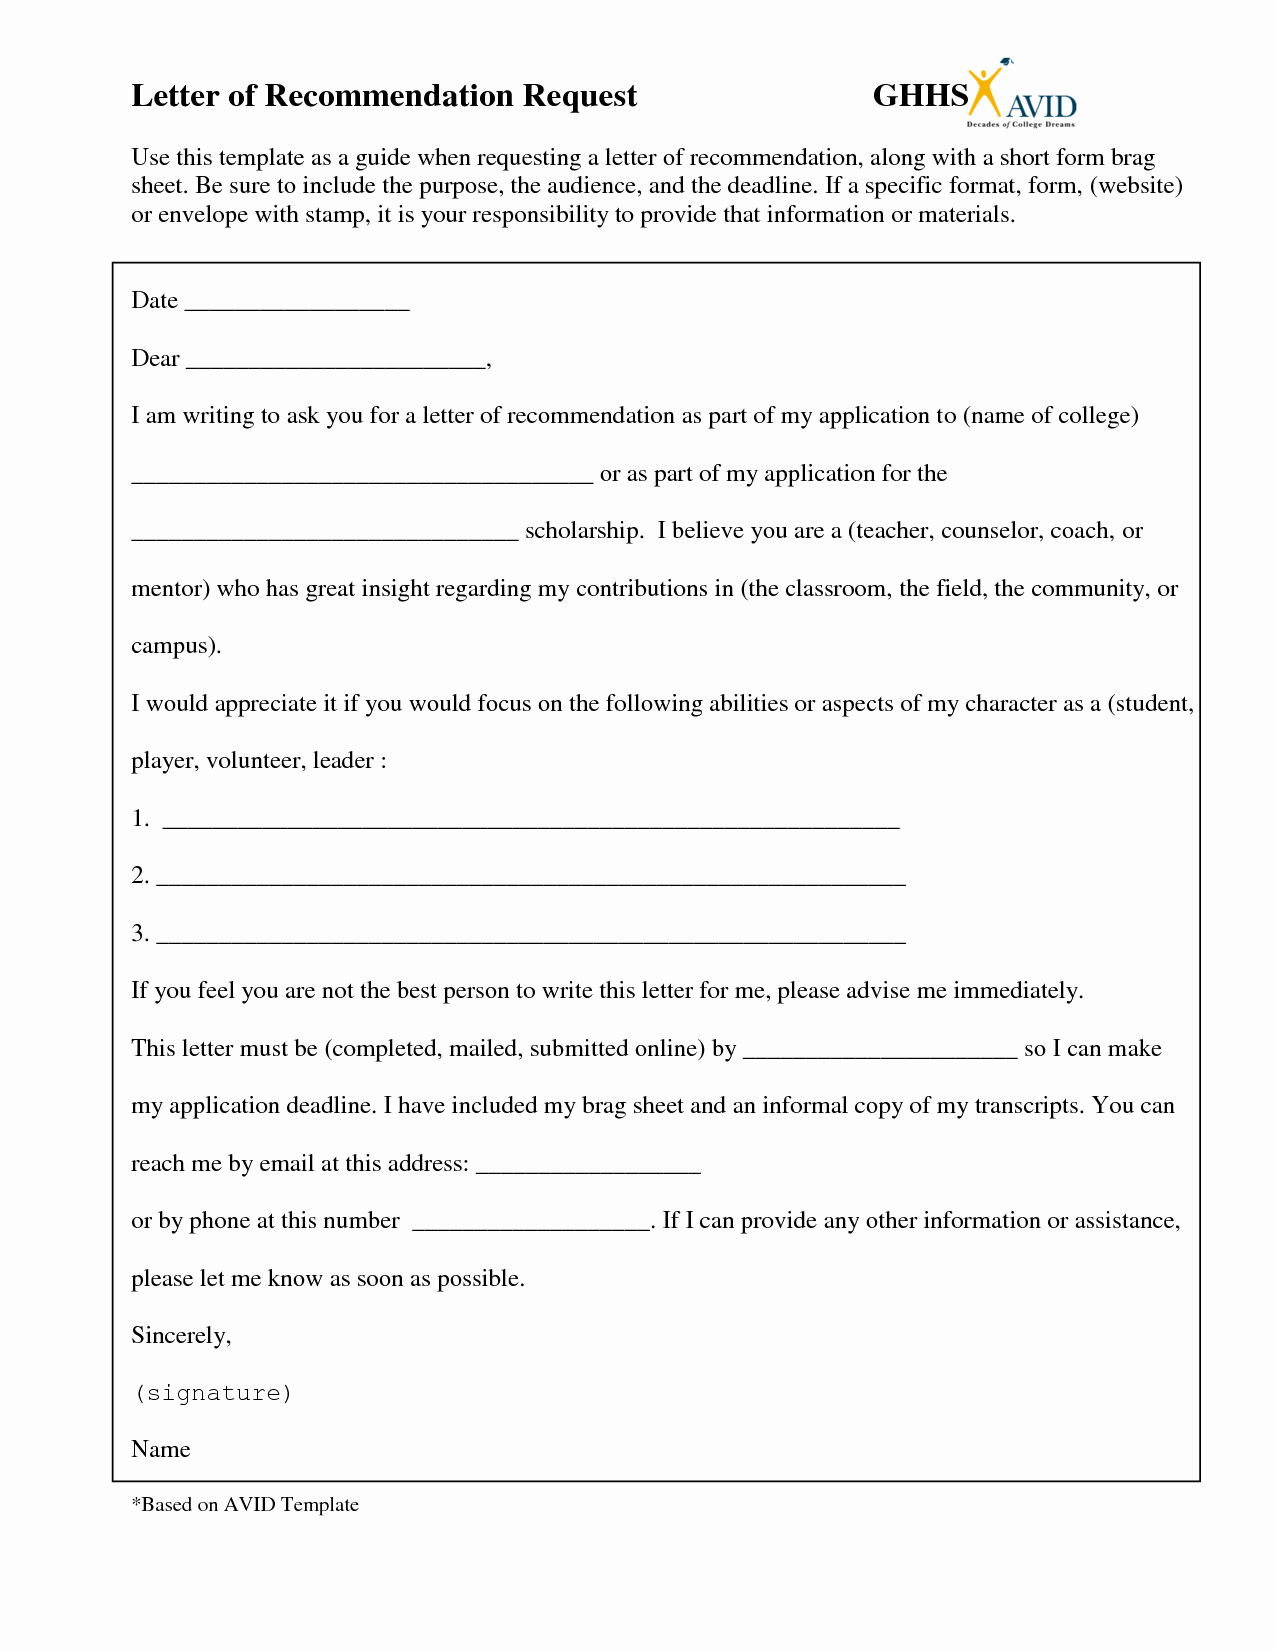 Form for Letters Of Recommendation Unique Request for Letter Of Rec Endation Template